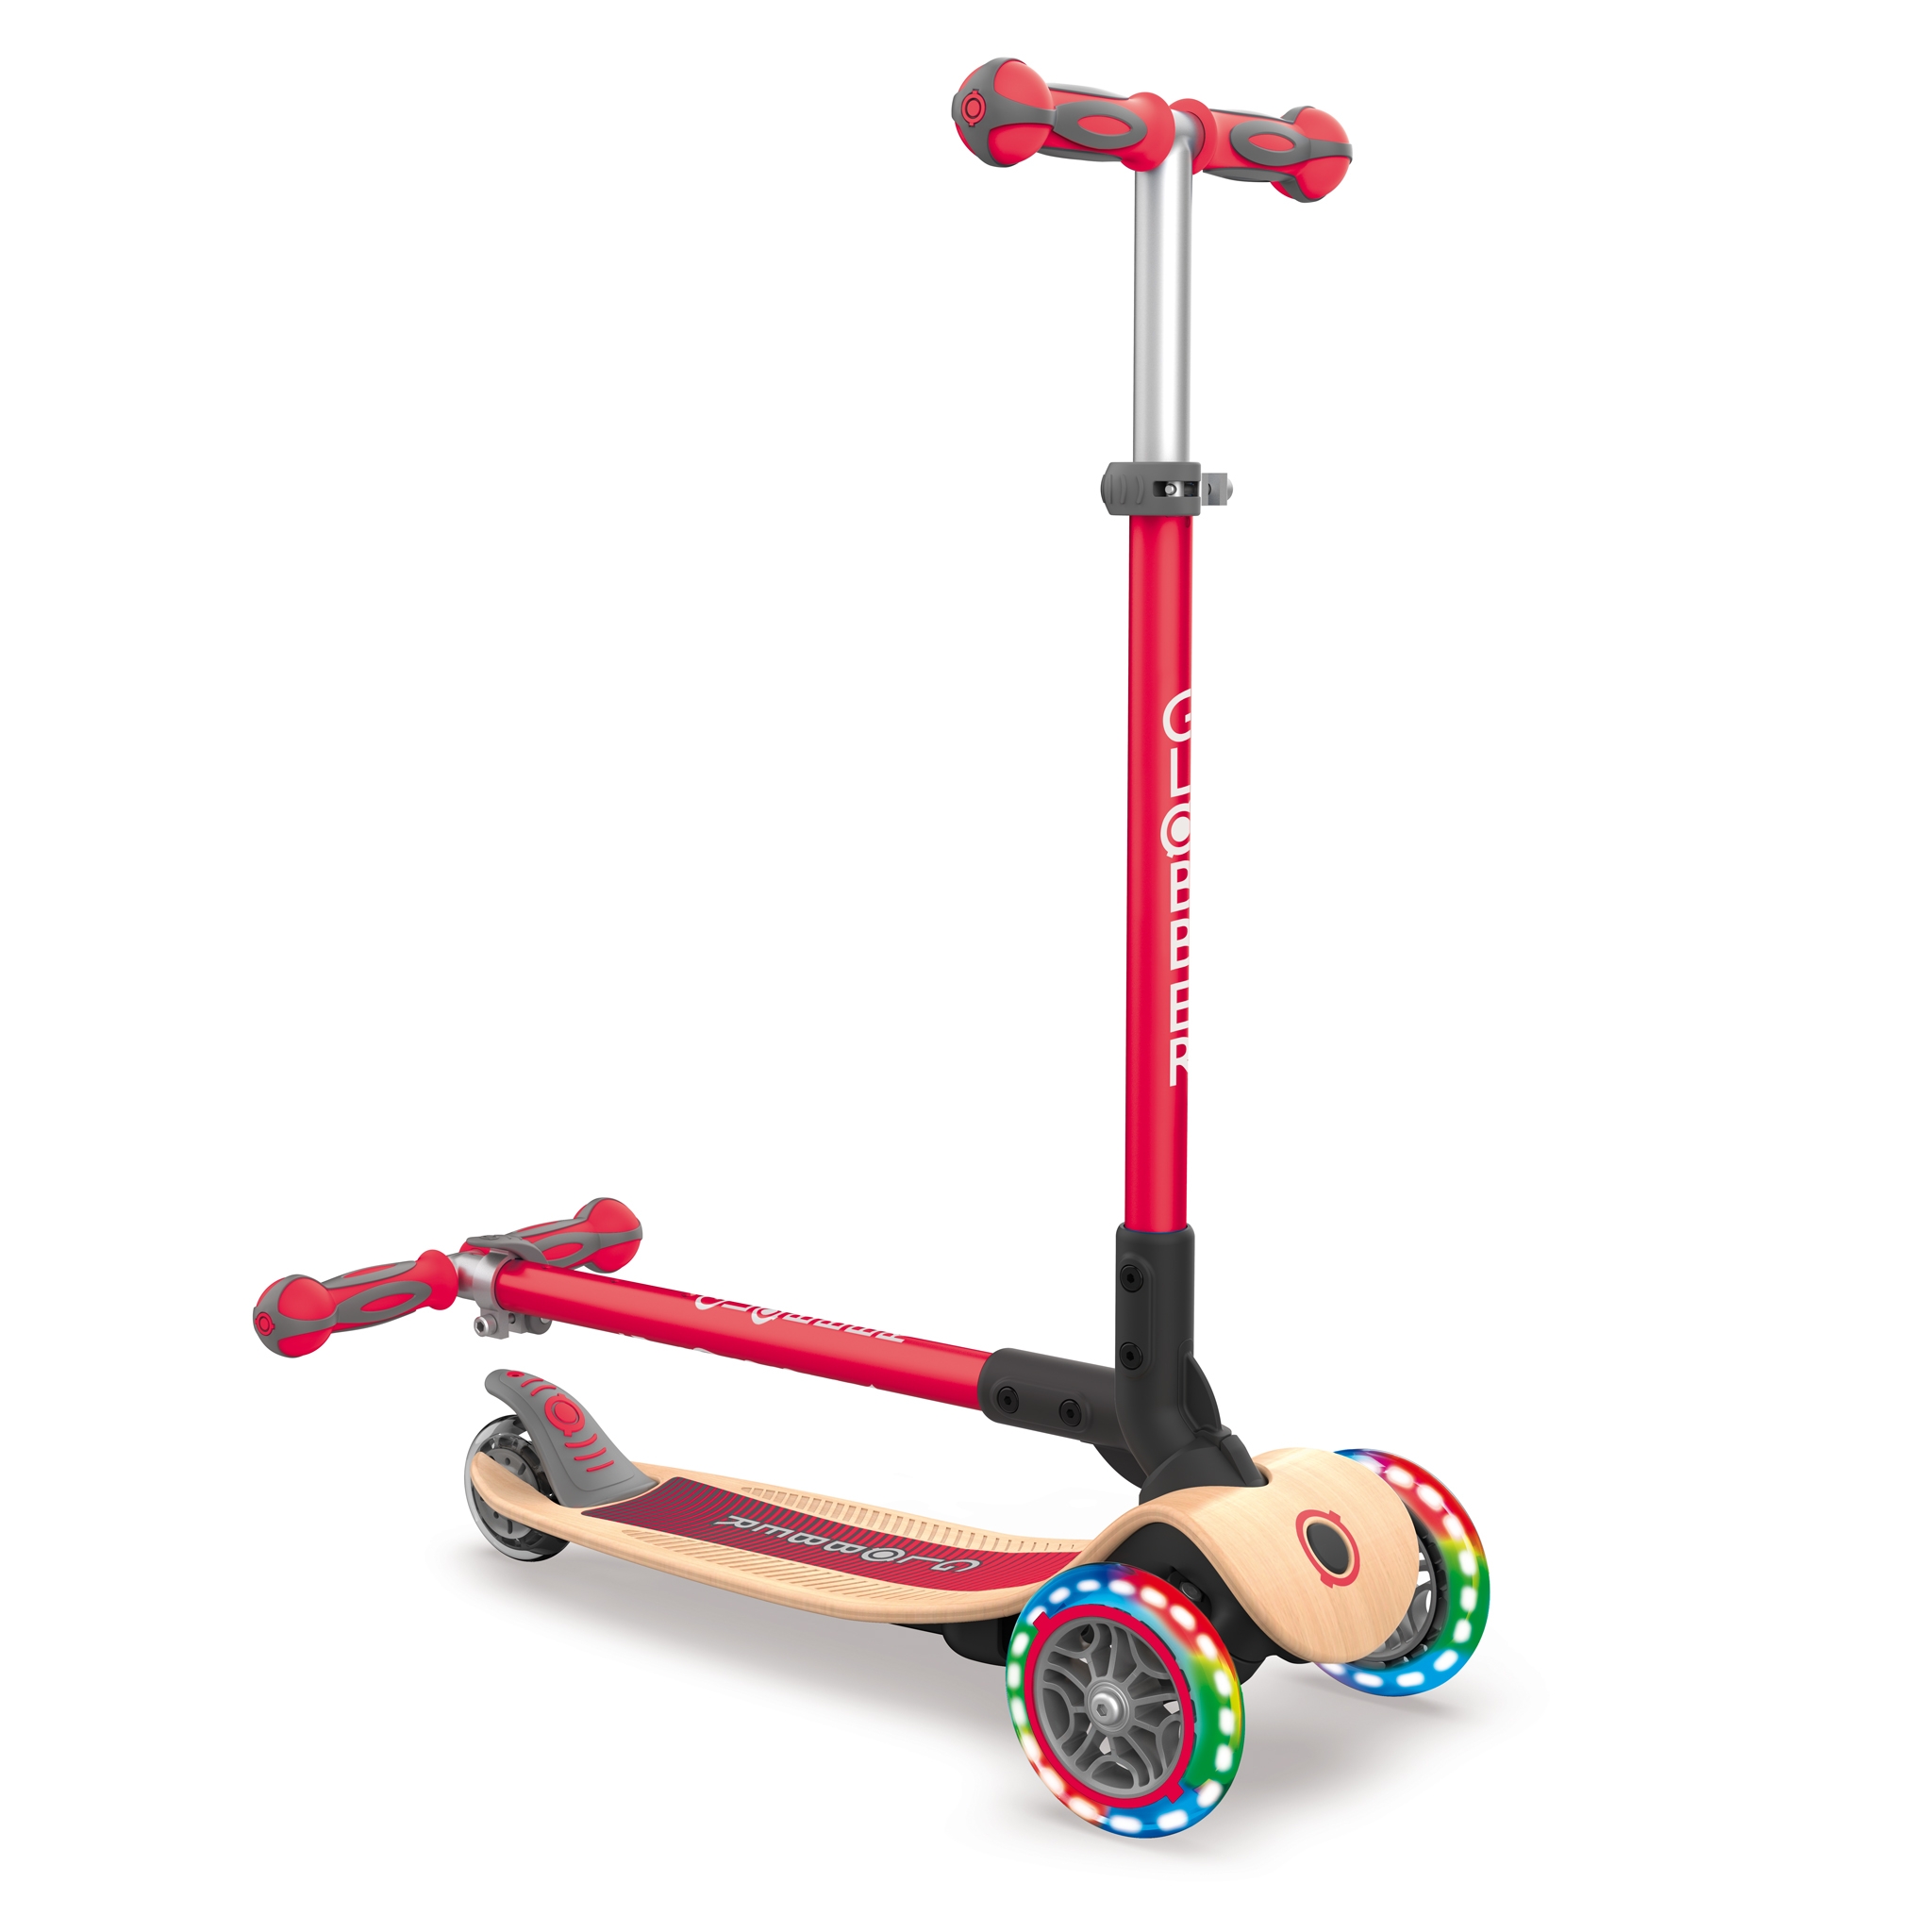 PRIMO-FOLDABLE-WOOD-LIGHTS-3-wheel-foldable-scooter-with-7-ply-wooden-scooter-deck-and-battery-free-light-up-wheels_new-red 2